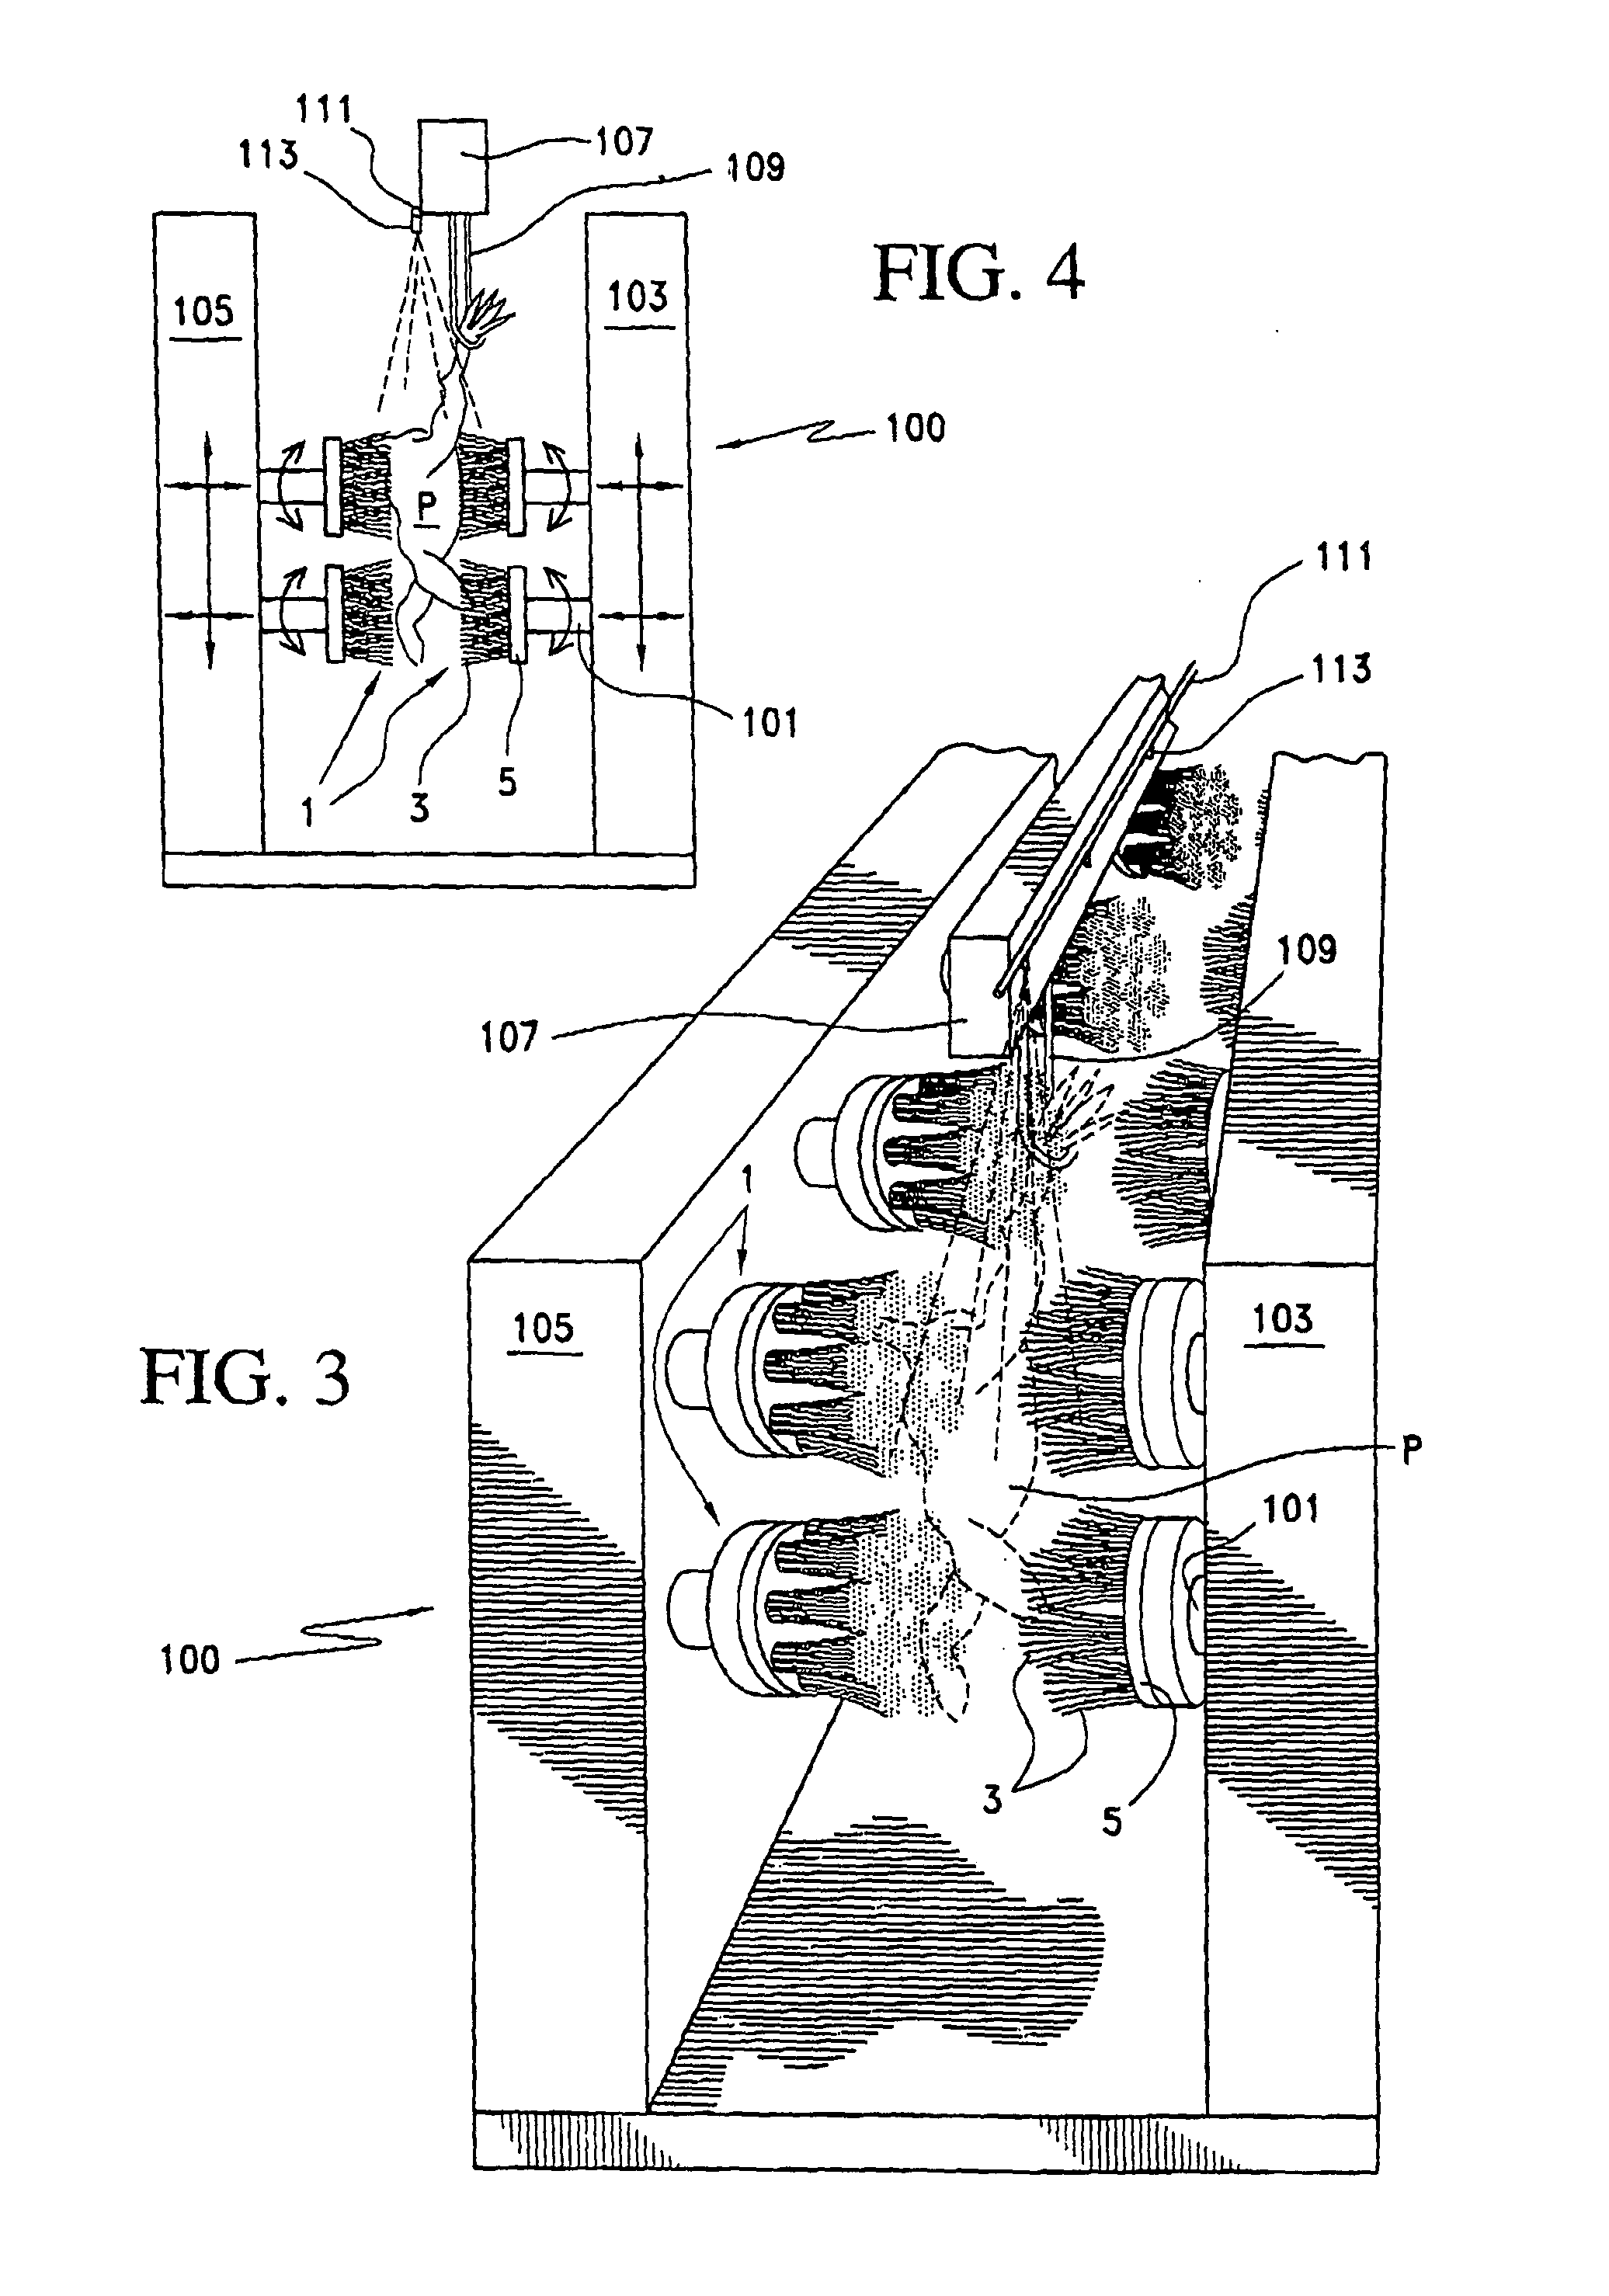 Poultry de-feathering apparatus and method